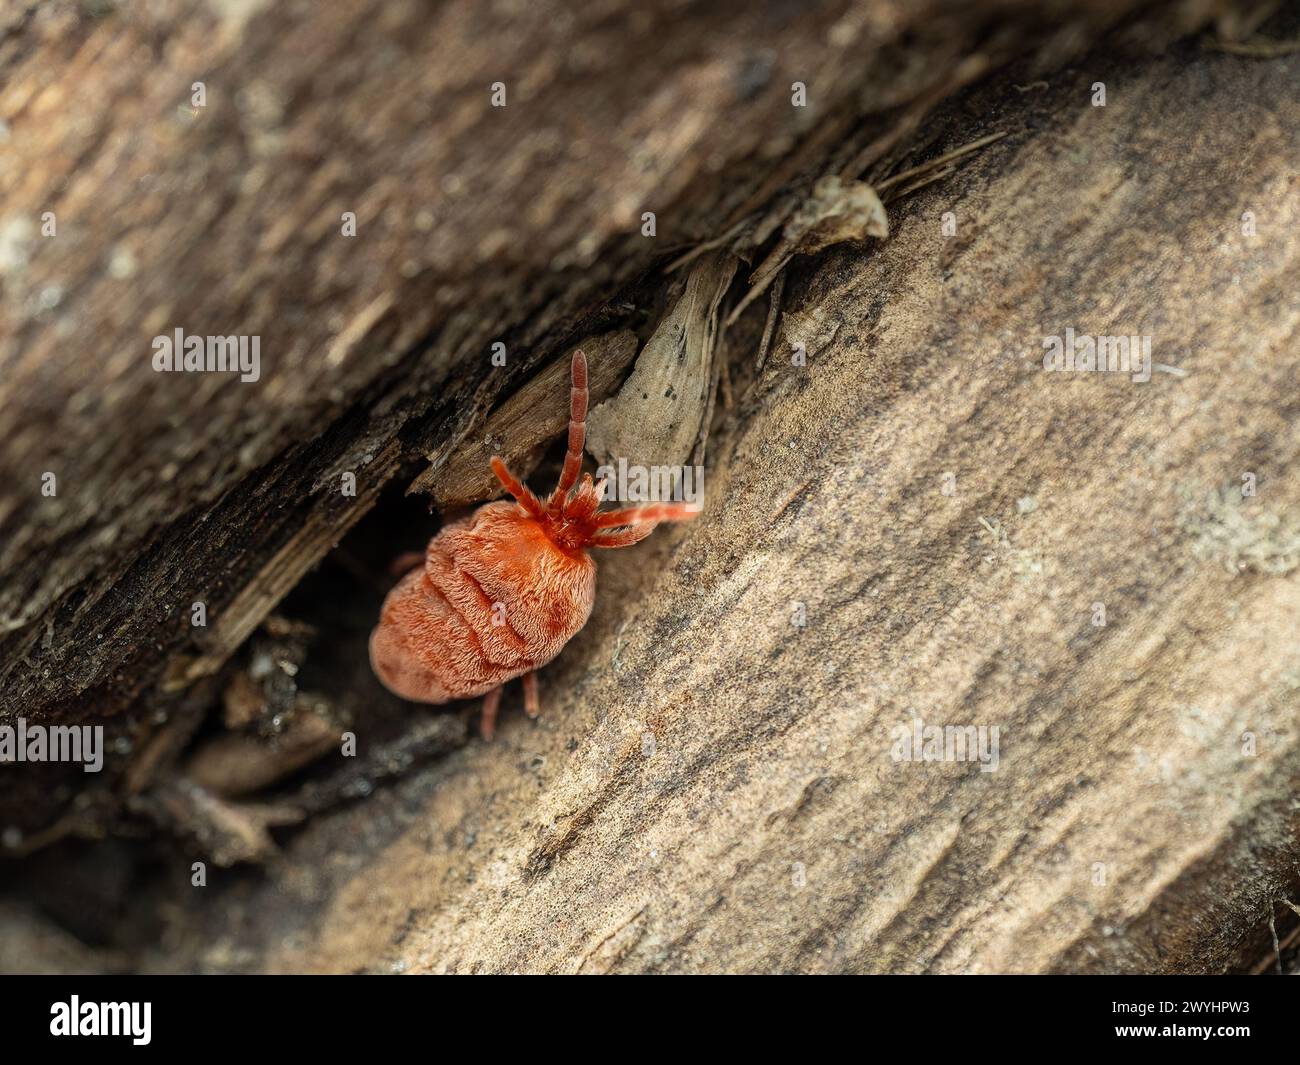 Pretty red velvet mite, Trombidiidae species, crawling on a rotten log Stock Photo